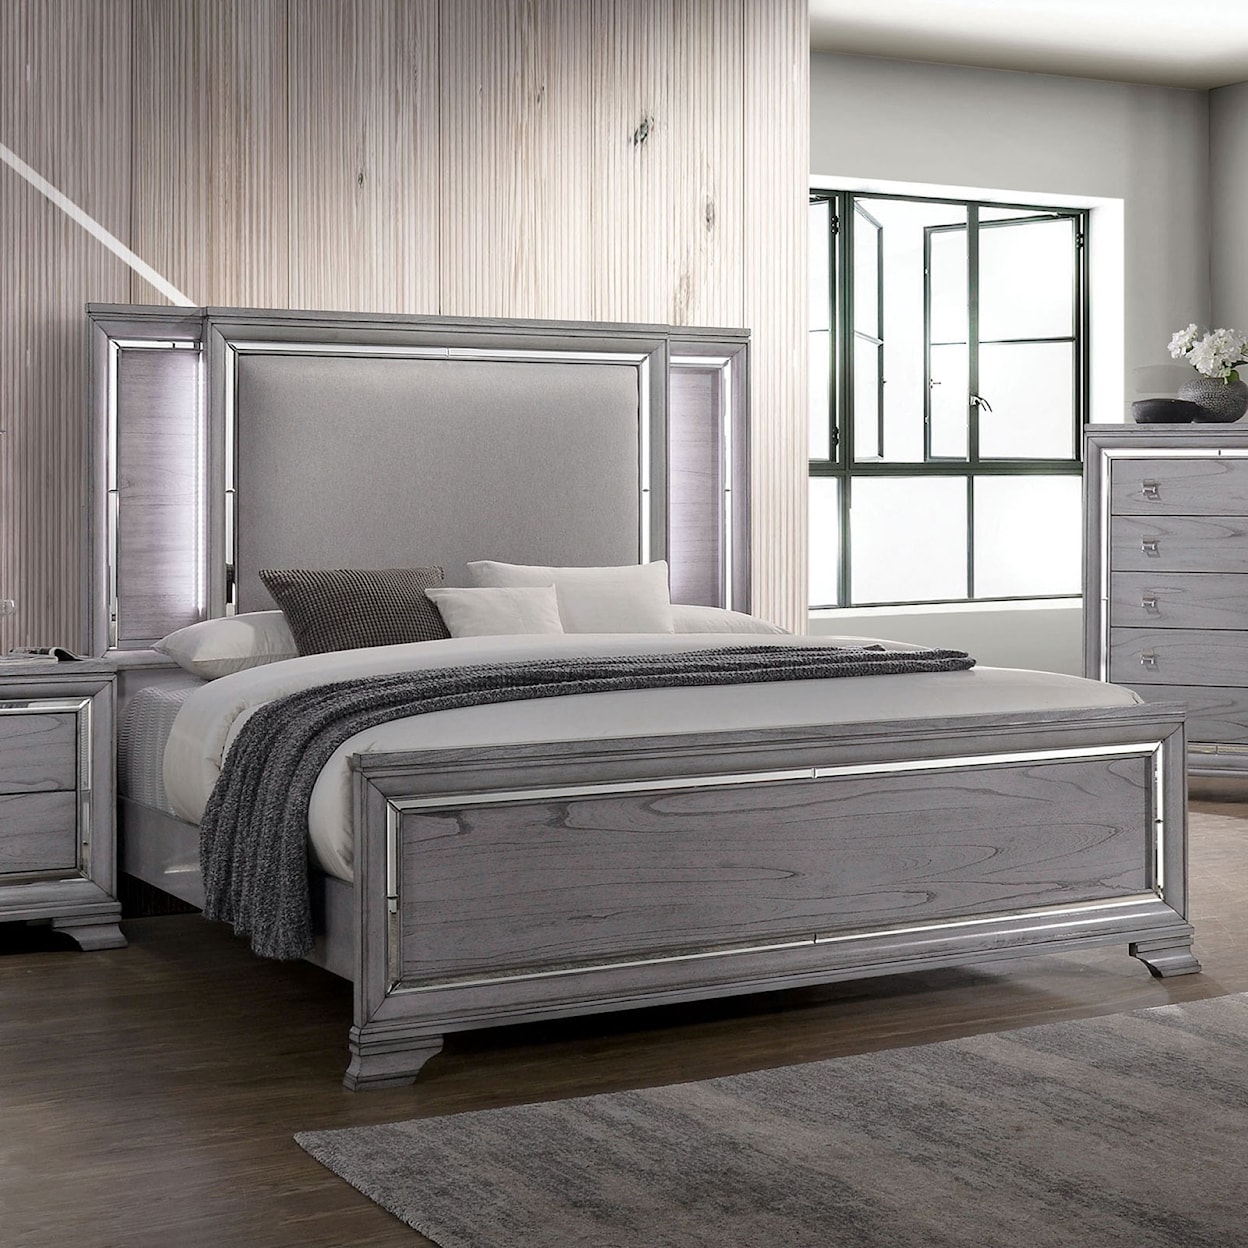 Furniture of America Alanis King Upholstered Bed